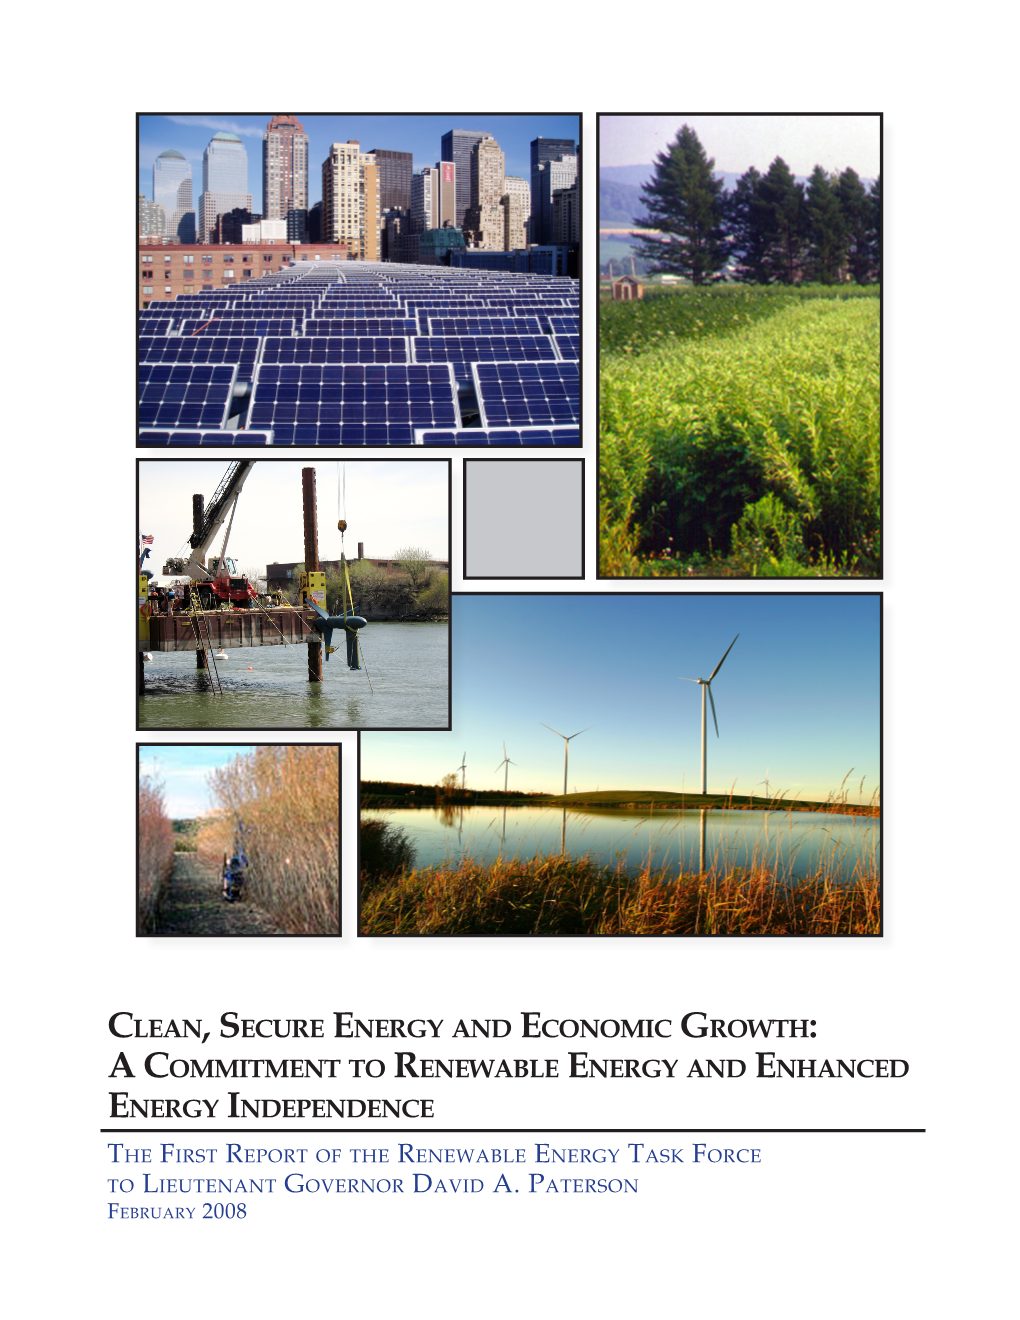 A Commitment to Renewable Energy and Enhanced Energy Independence the First Report of the Renewable Energy Task Force to Lieutenant Governor David A